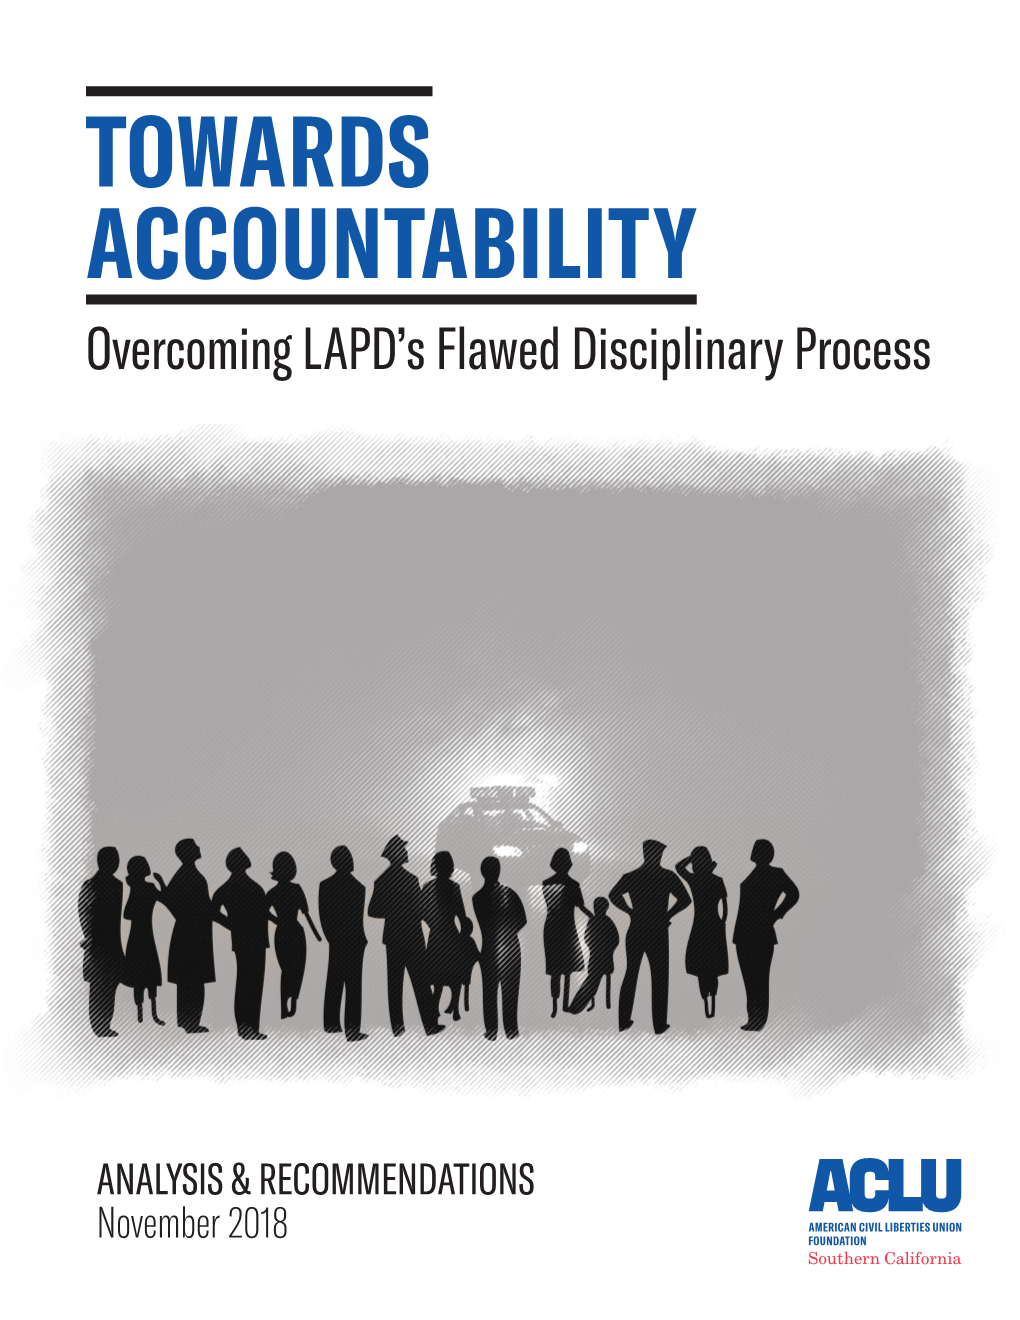 TOWARDS ACCOUNTABILITY Overcoming LAPD’S Flawed Disciplinary Process